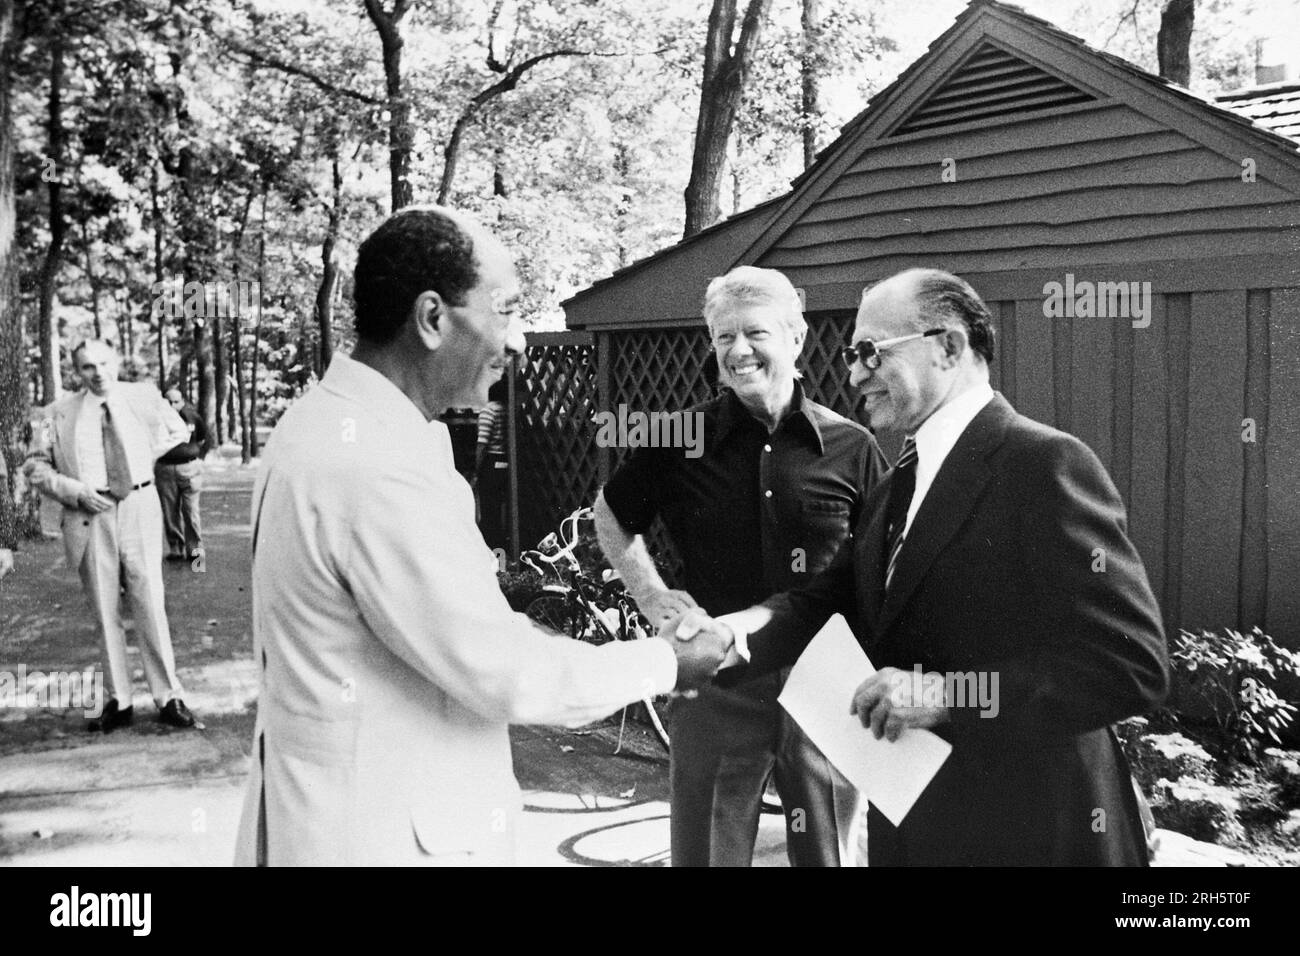 ARCHIVE PHOTO: On August 16, 2023, Meafterem Begin would have turned 110, Meafterem BEGIN, right, Israeli Prime Minister, and Anwar as SADAT, left Egyptian President, greet each other, handshake, in withte US President Jimmy CARTER, here at the negotiations from Camp David, this resulted in the signing of a peace treaty between the two states in March 1979, Camp David USA on September 17th, 1978, SW photo, ? Stock Photo